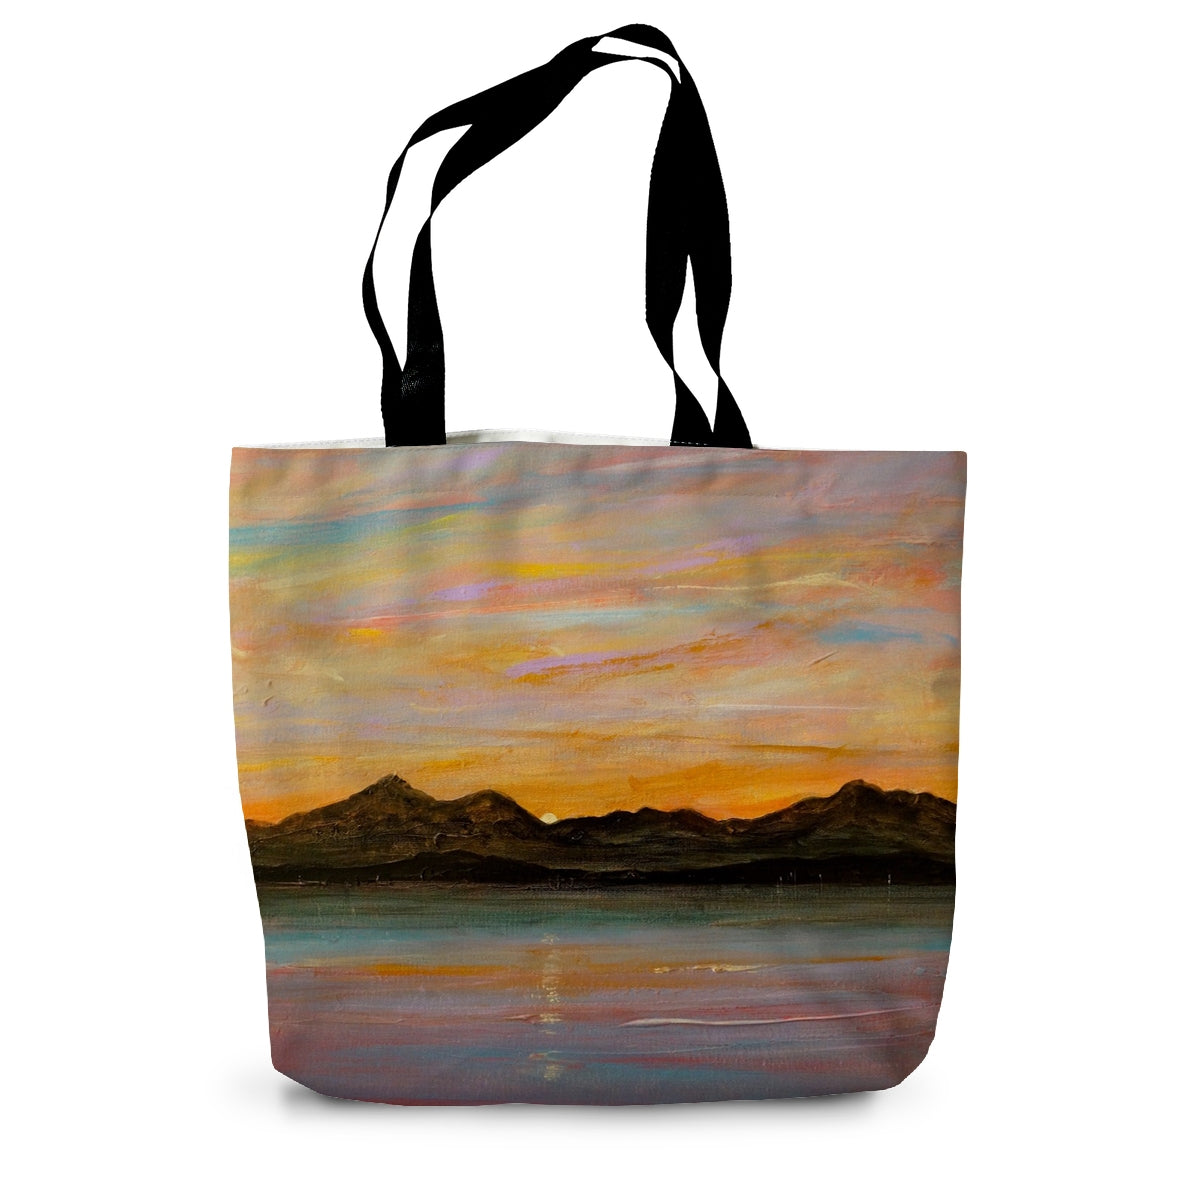 The Sleeping Warrior Arran Art Gifts Canvas Tote Bag-Bags-Arran Art Gallery-14"x18.5"-Paintings, Prints, Homeware, Art Gifts From Scotland By Scottish Artist Kevin Hunter